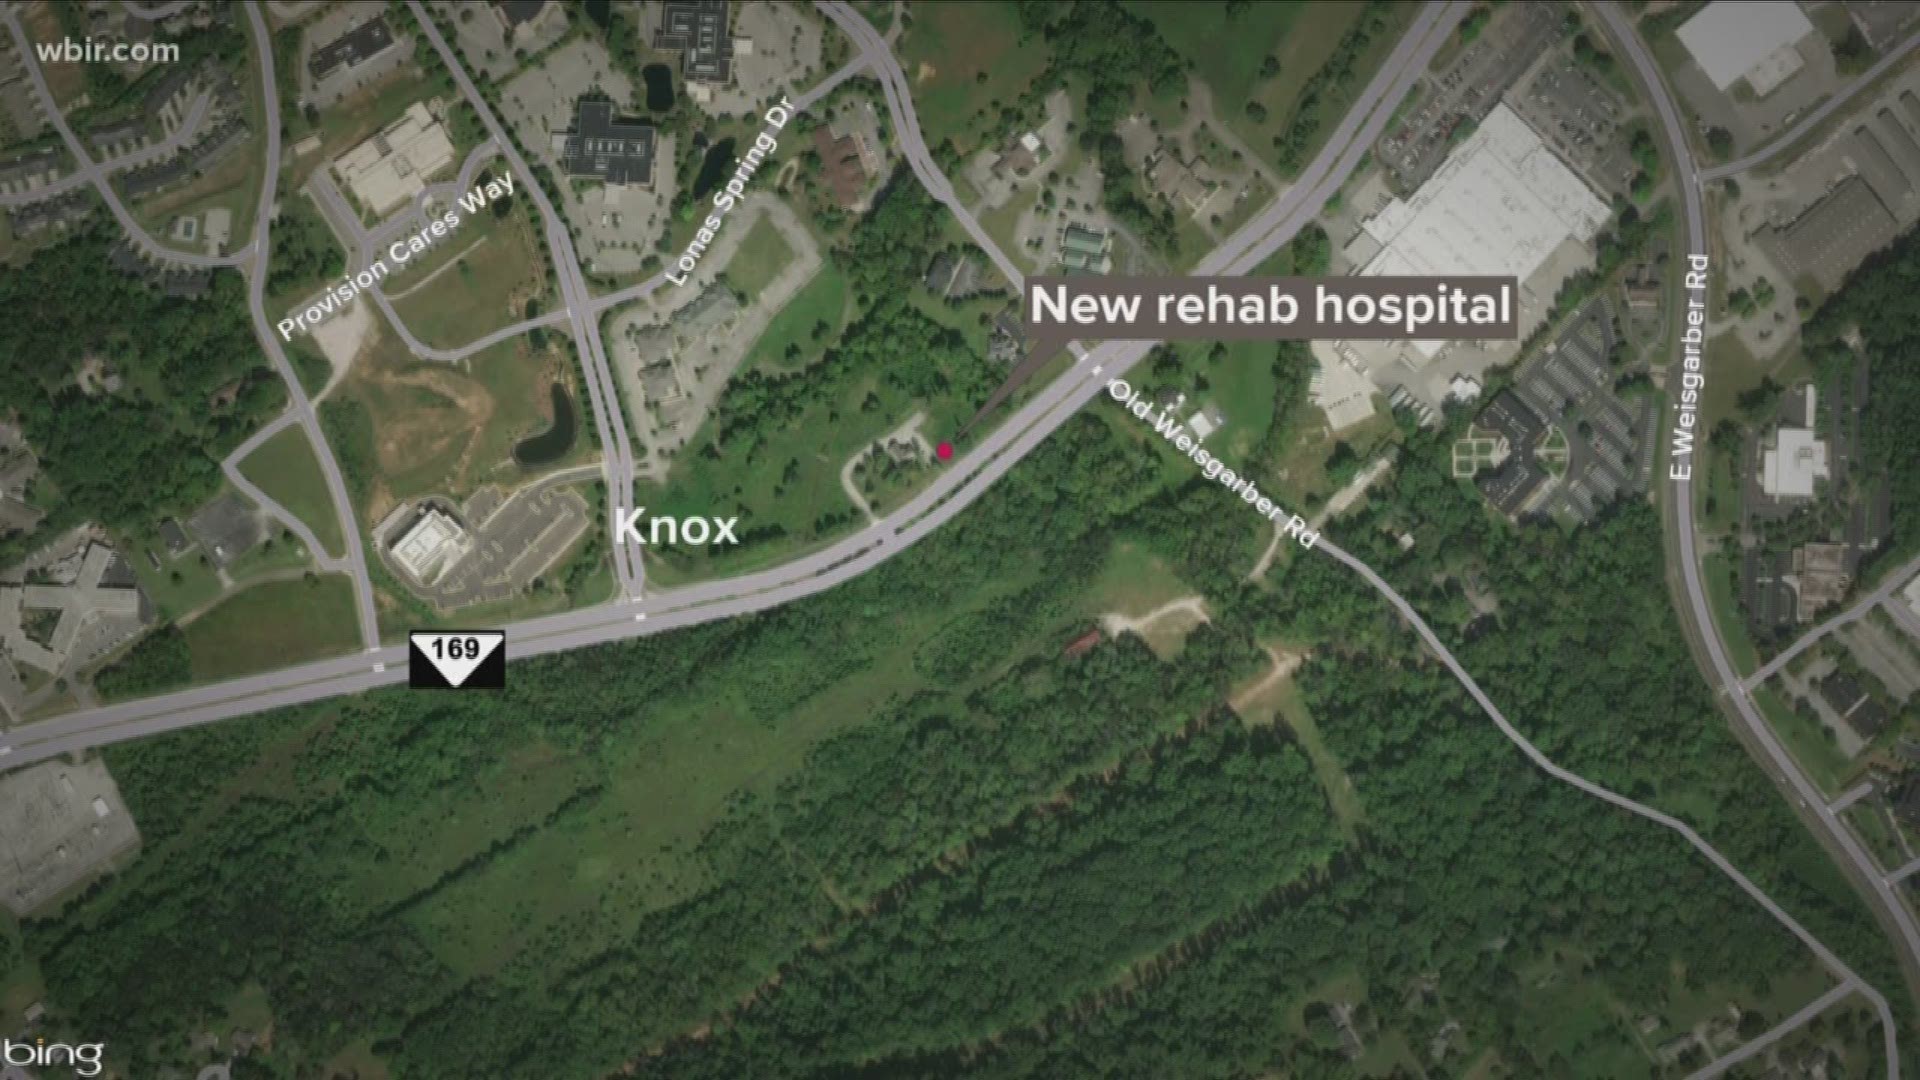 The 57-bed in-patient facility will be on tennova property near the corner of Middlebrook Pike and Old Weisgarber Road in West Knoxville.